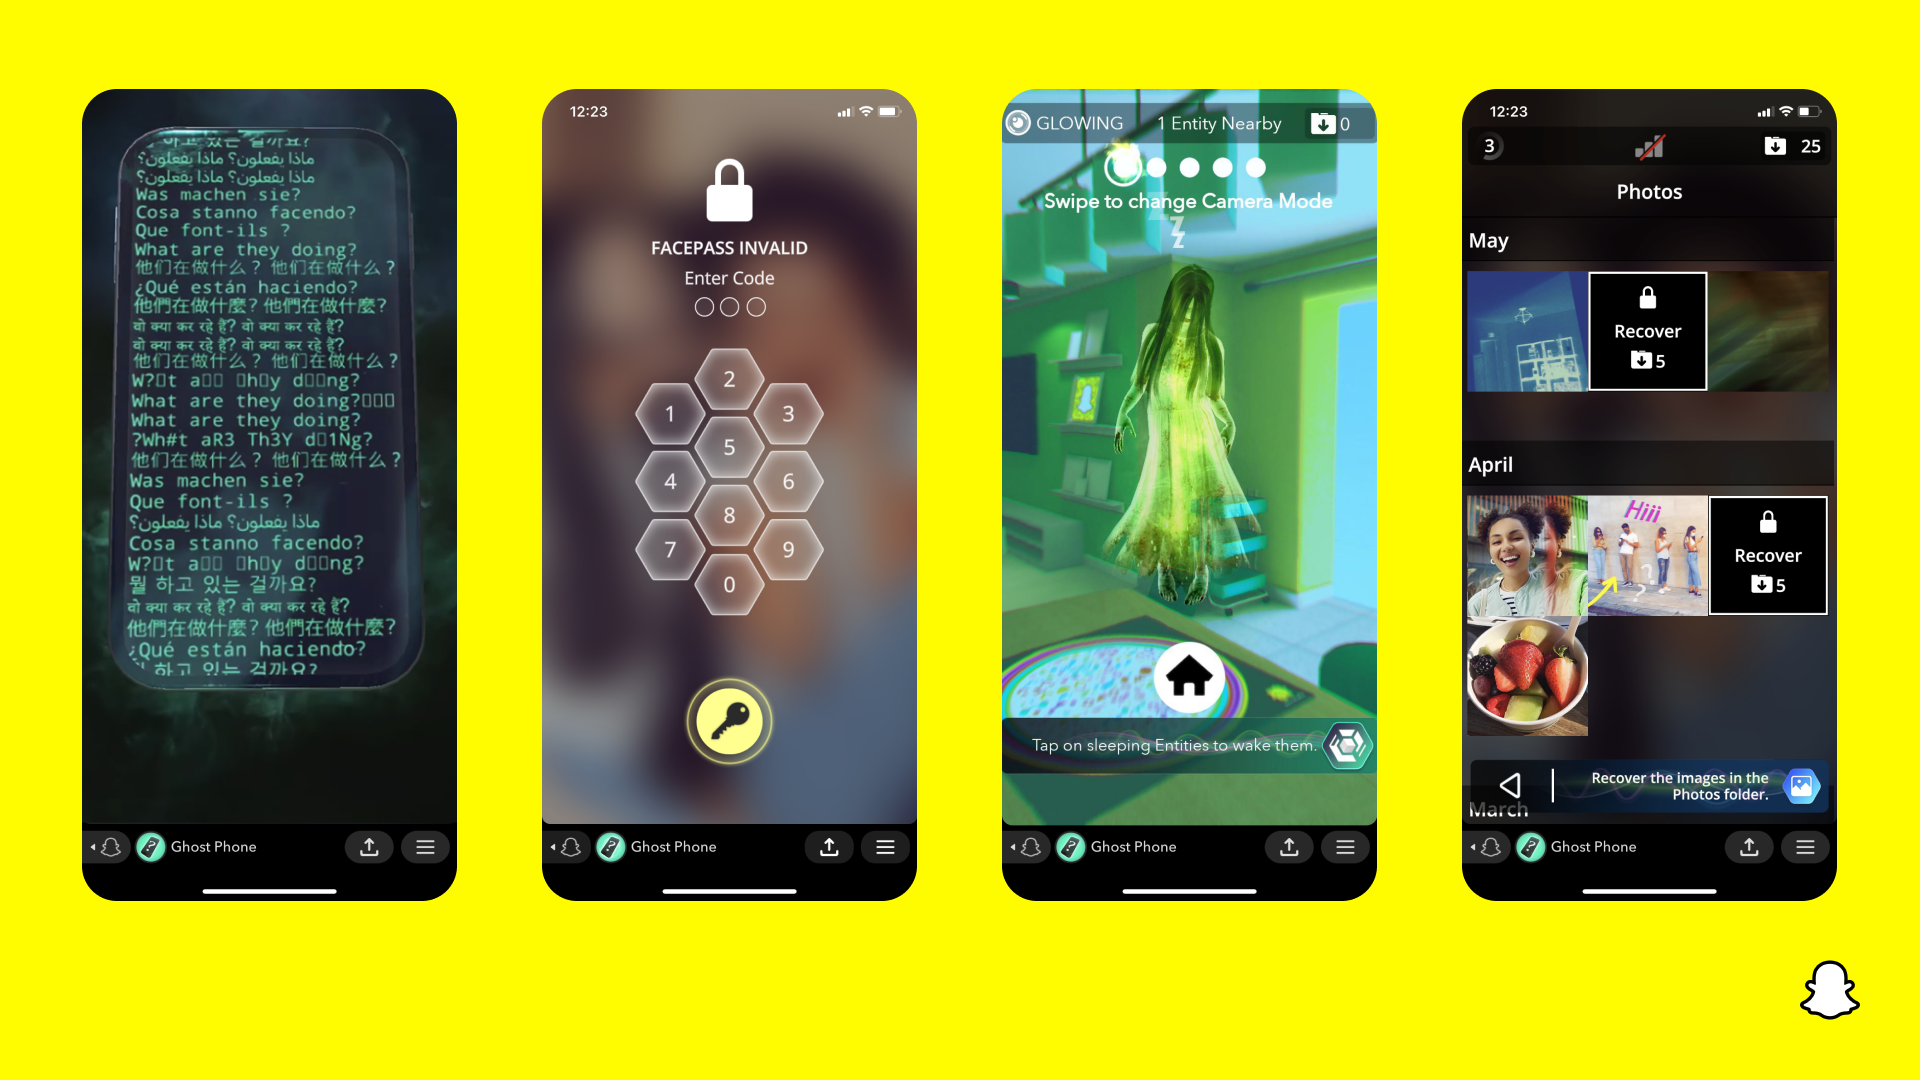 Four screenshots of Snapchat's new Ghost Phone game.